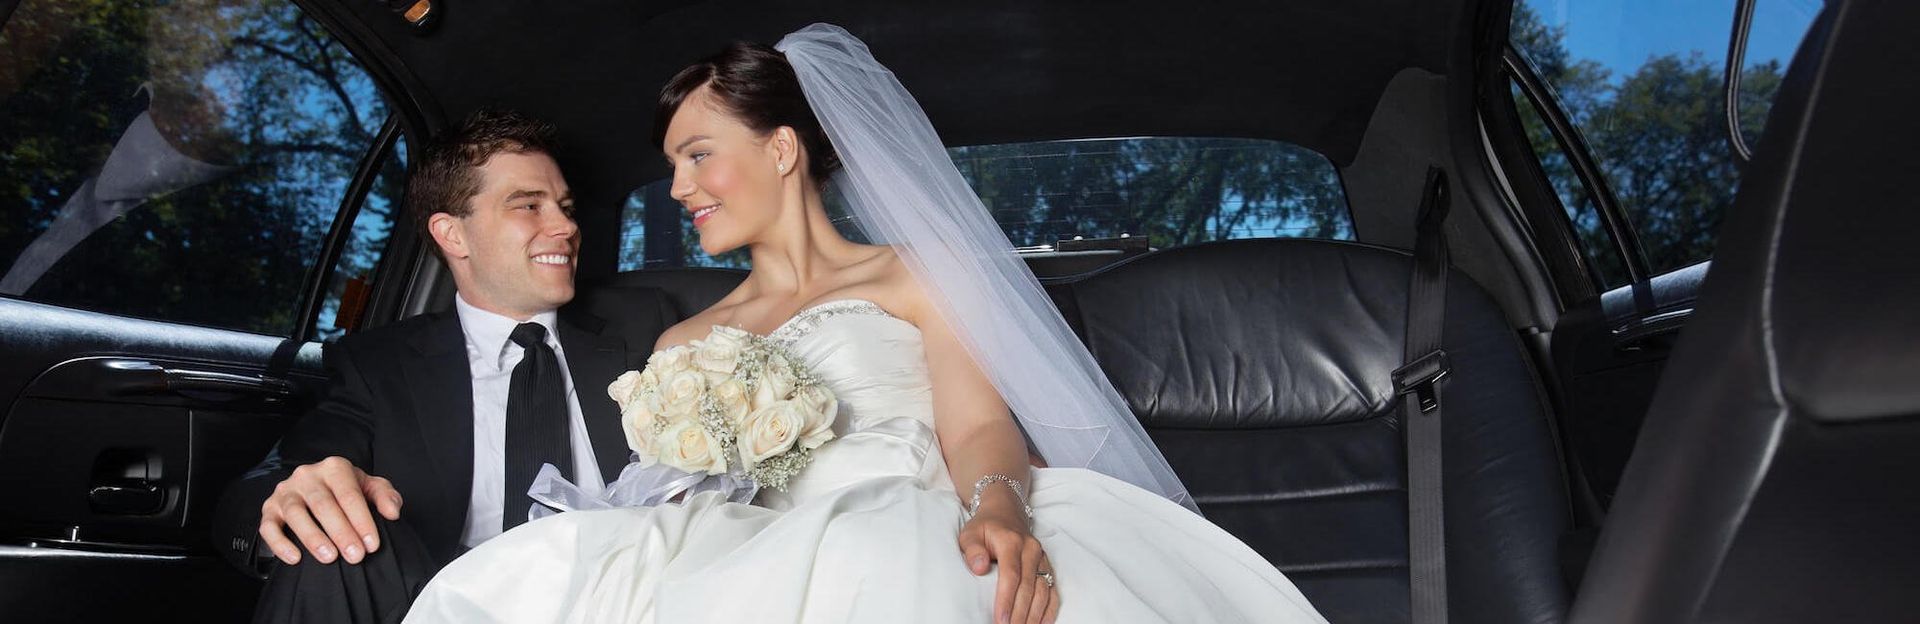 Wedding Limo Services